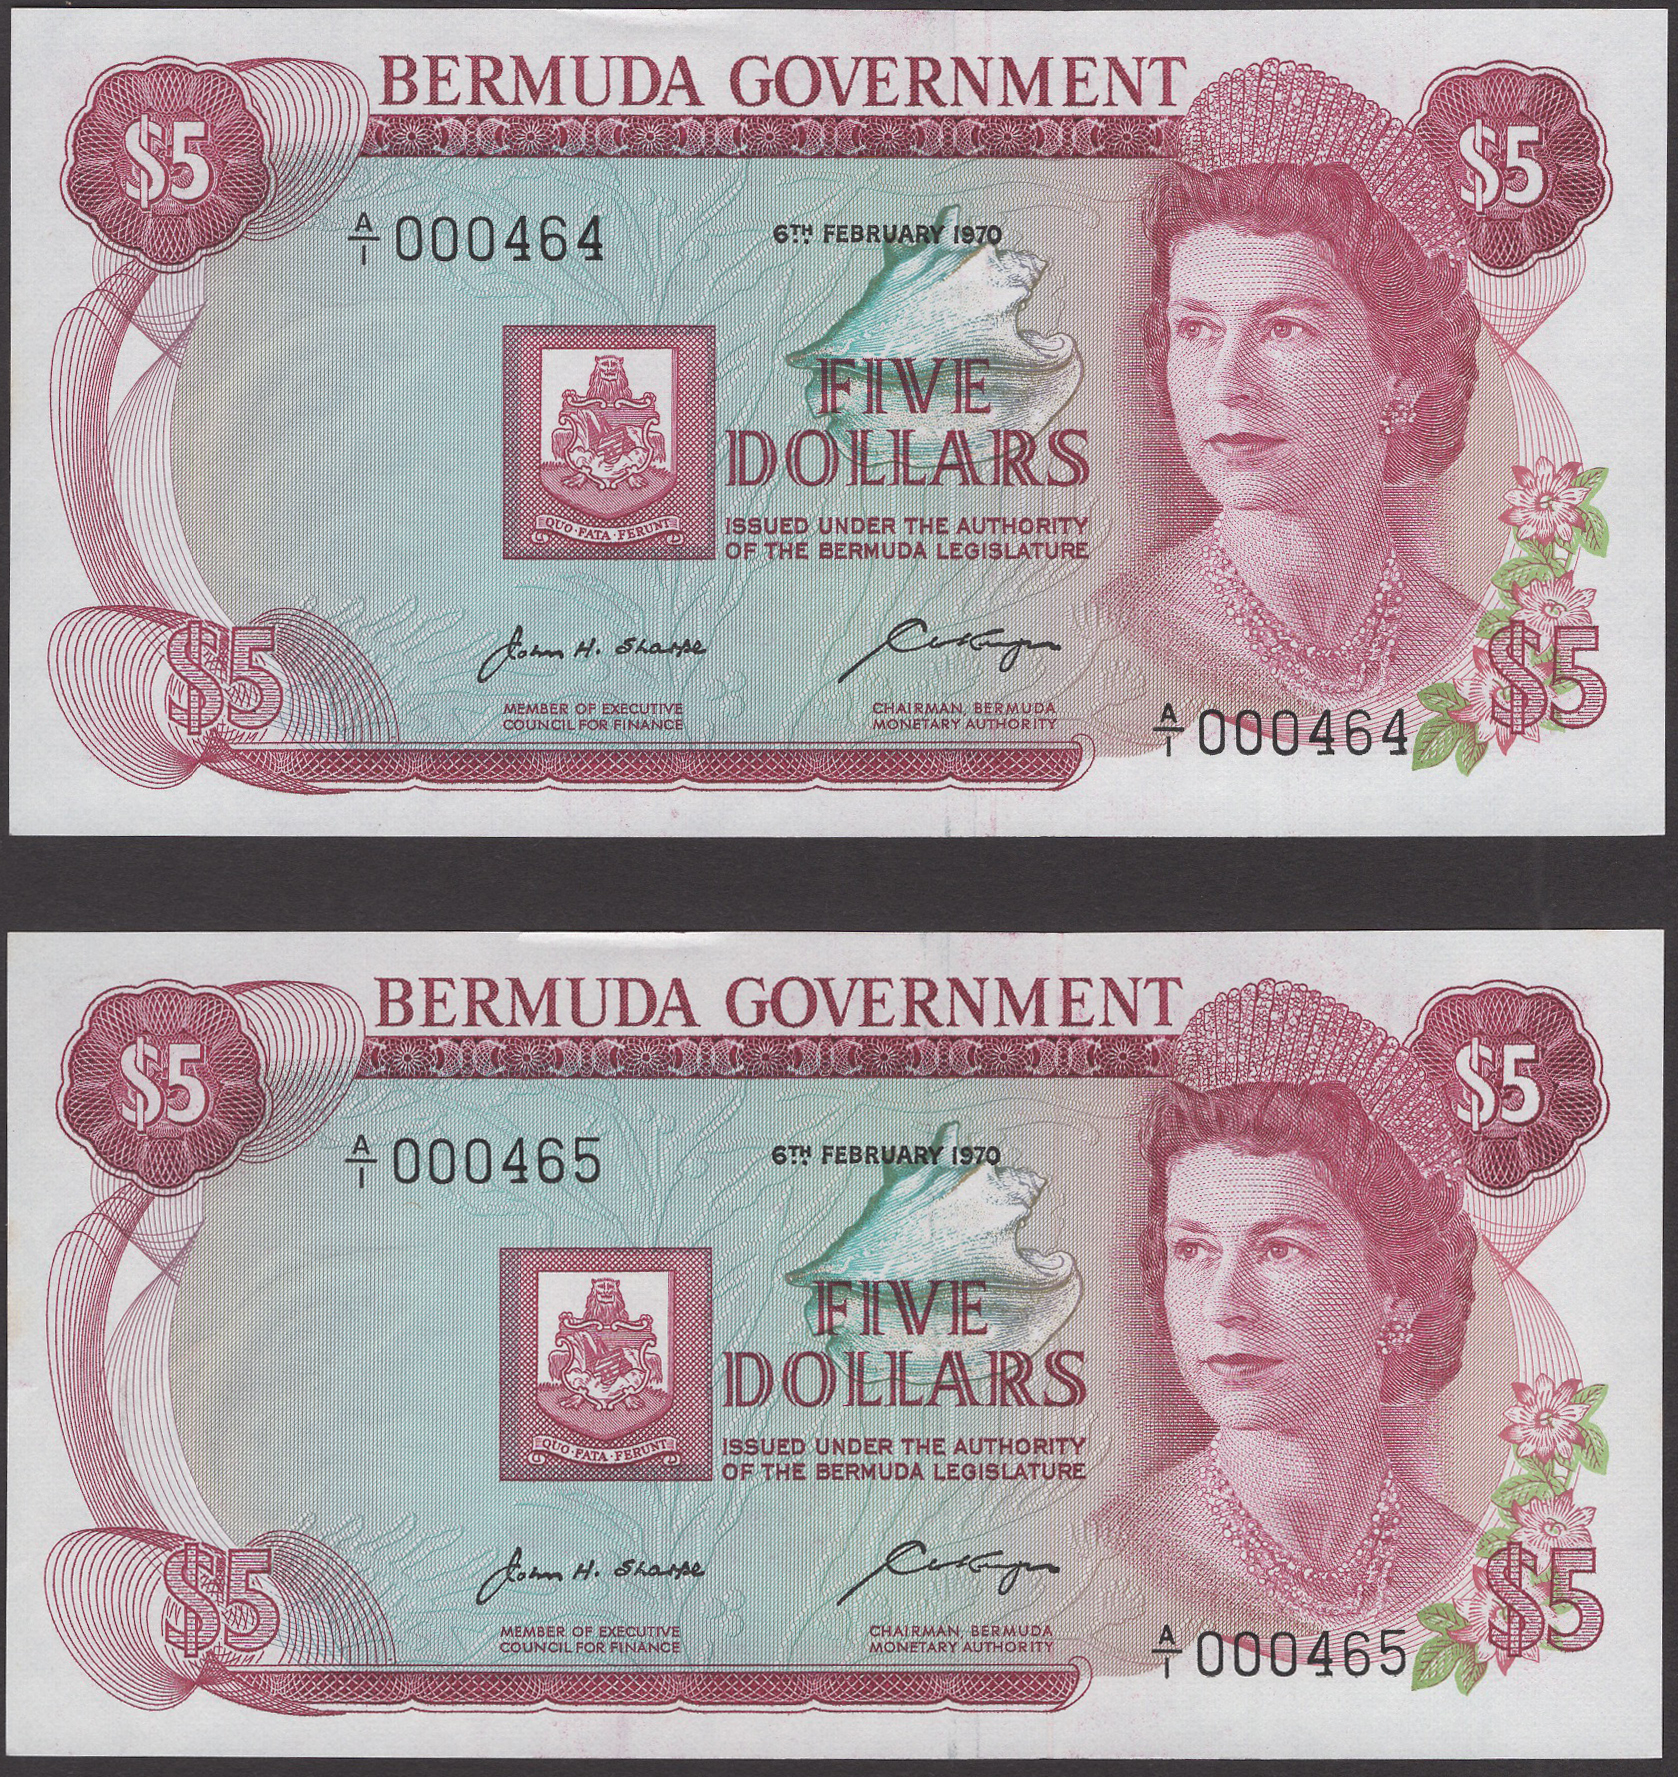 Bermuda Government, $5 (2), 6 February 1970, serial numbers A/1 000464-465, light handling,...